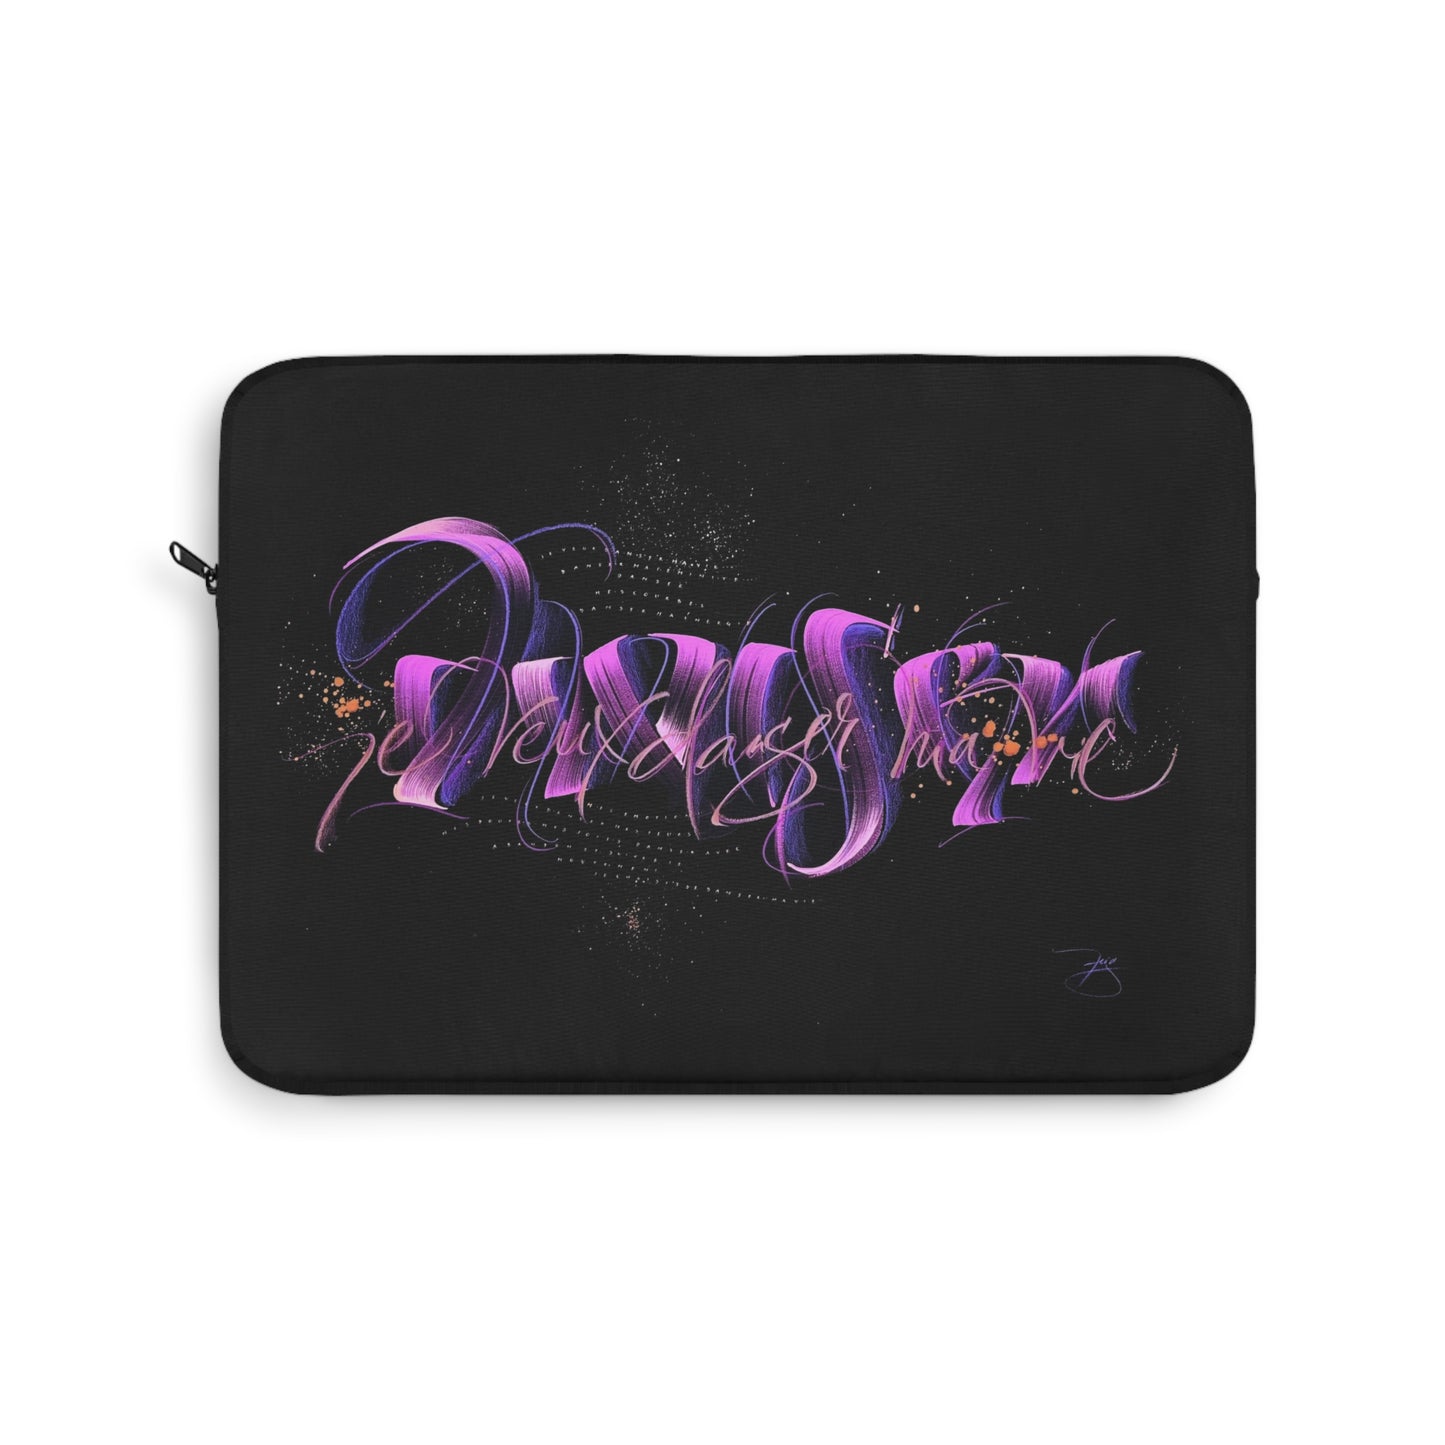 Laptop Sleeve - "I want to dance my life"